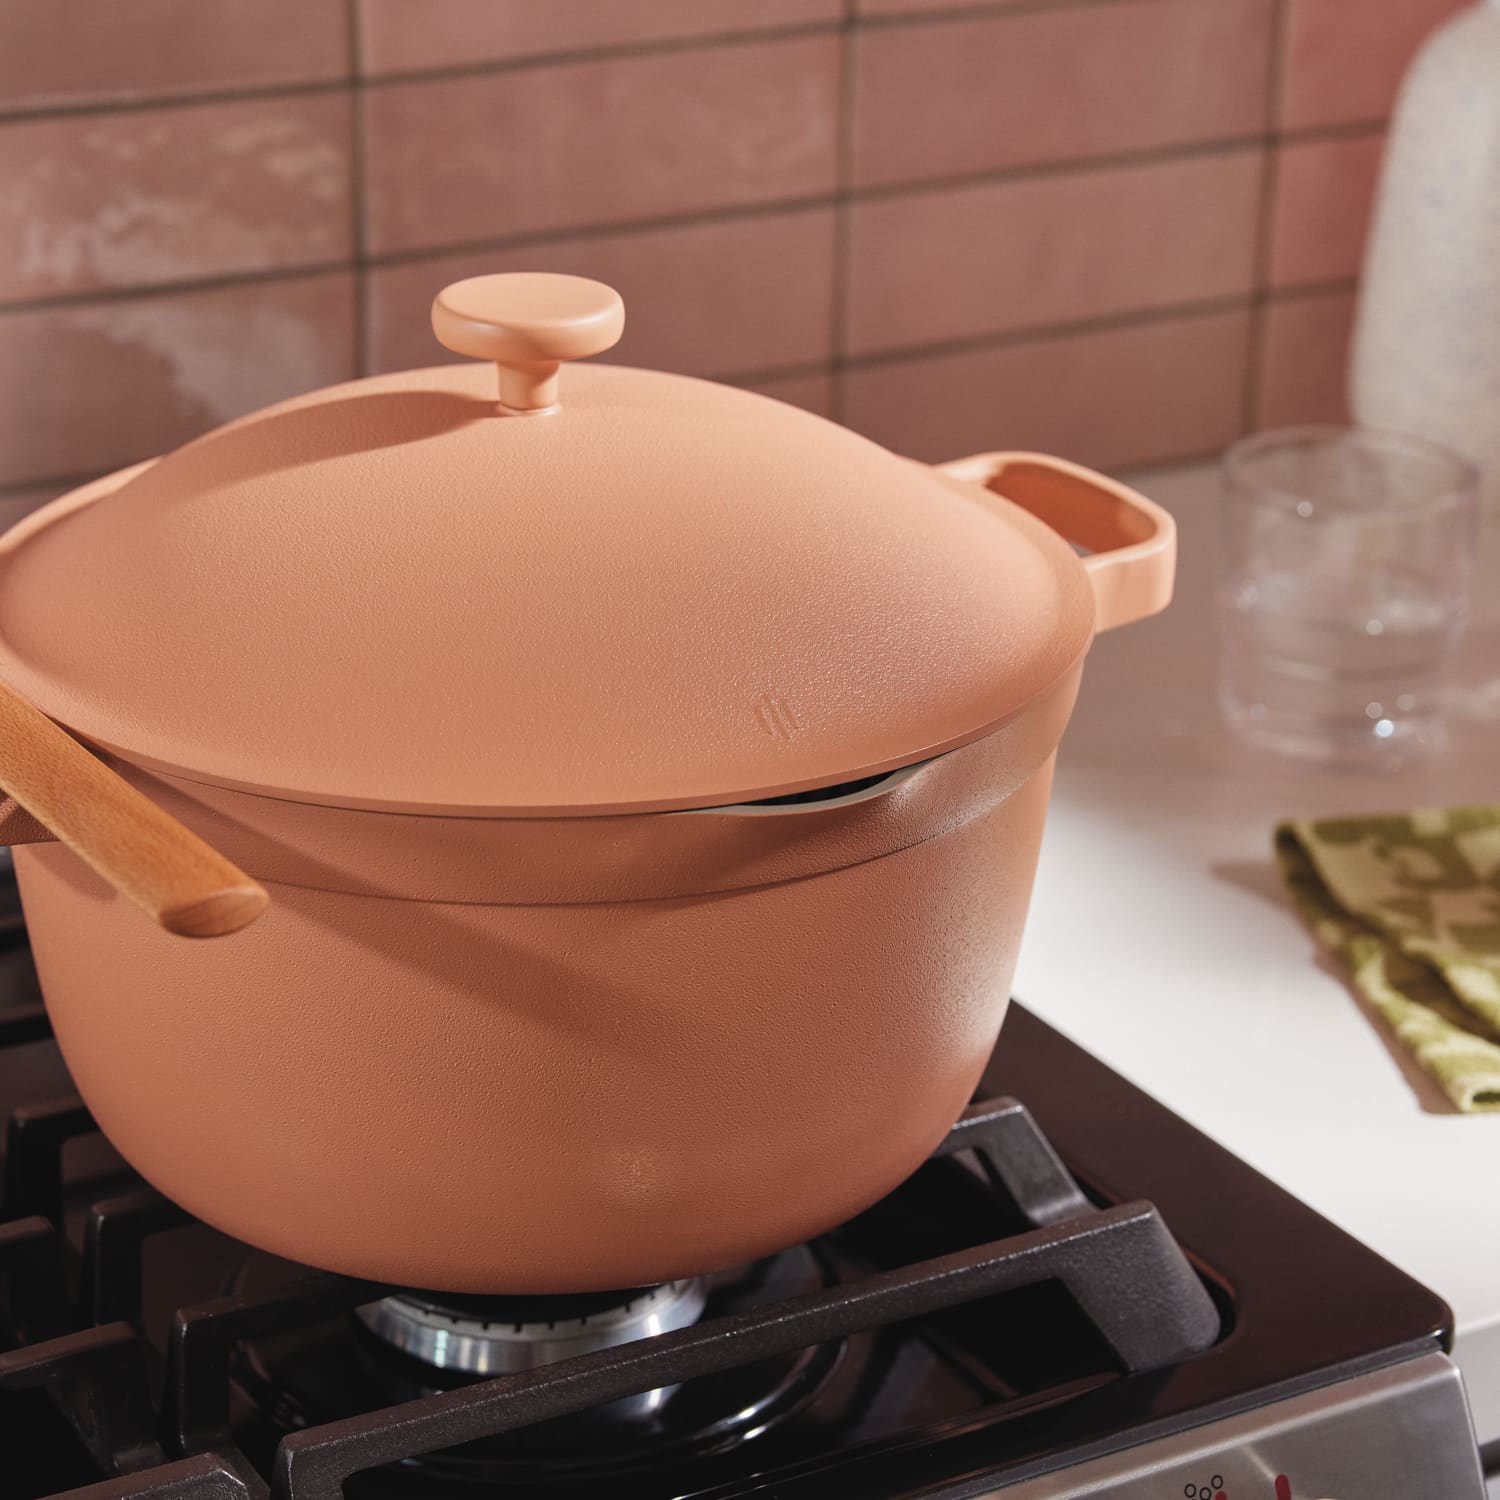 Mini Perfect Pot review: This pot solved my issues with boiling